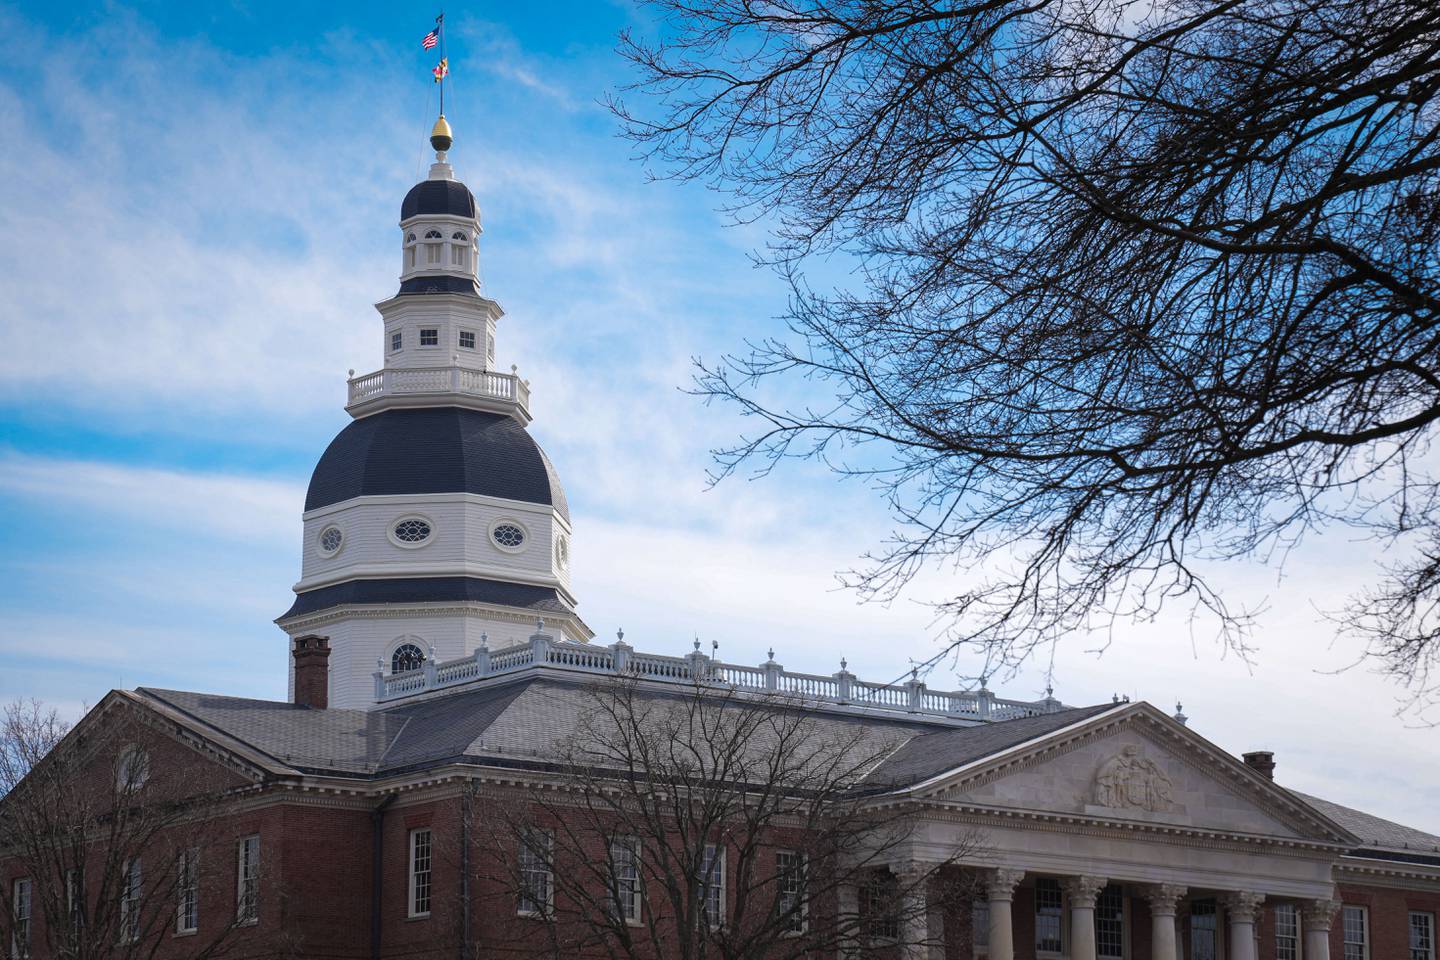 Exterior of the Maryland State House.